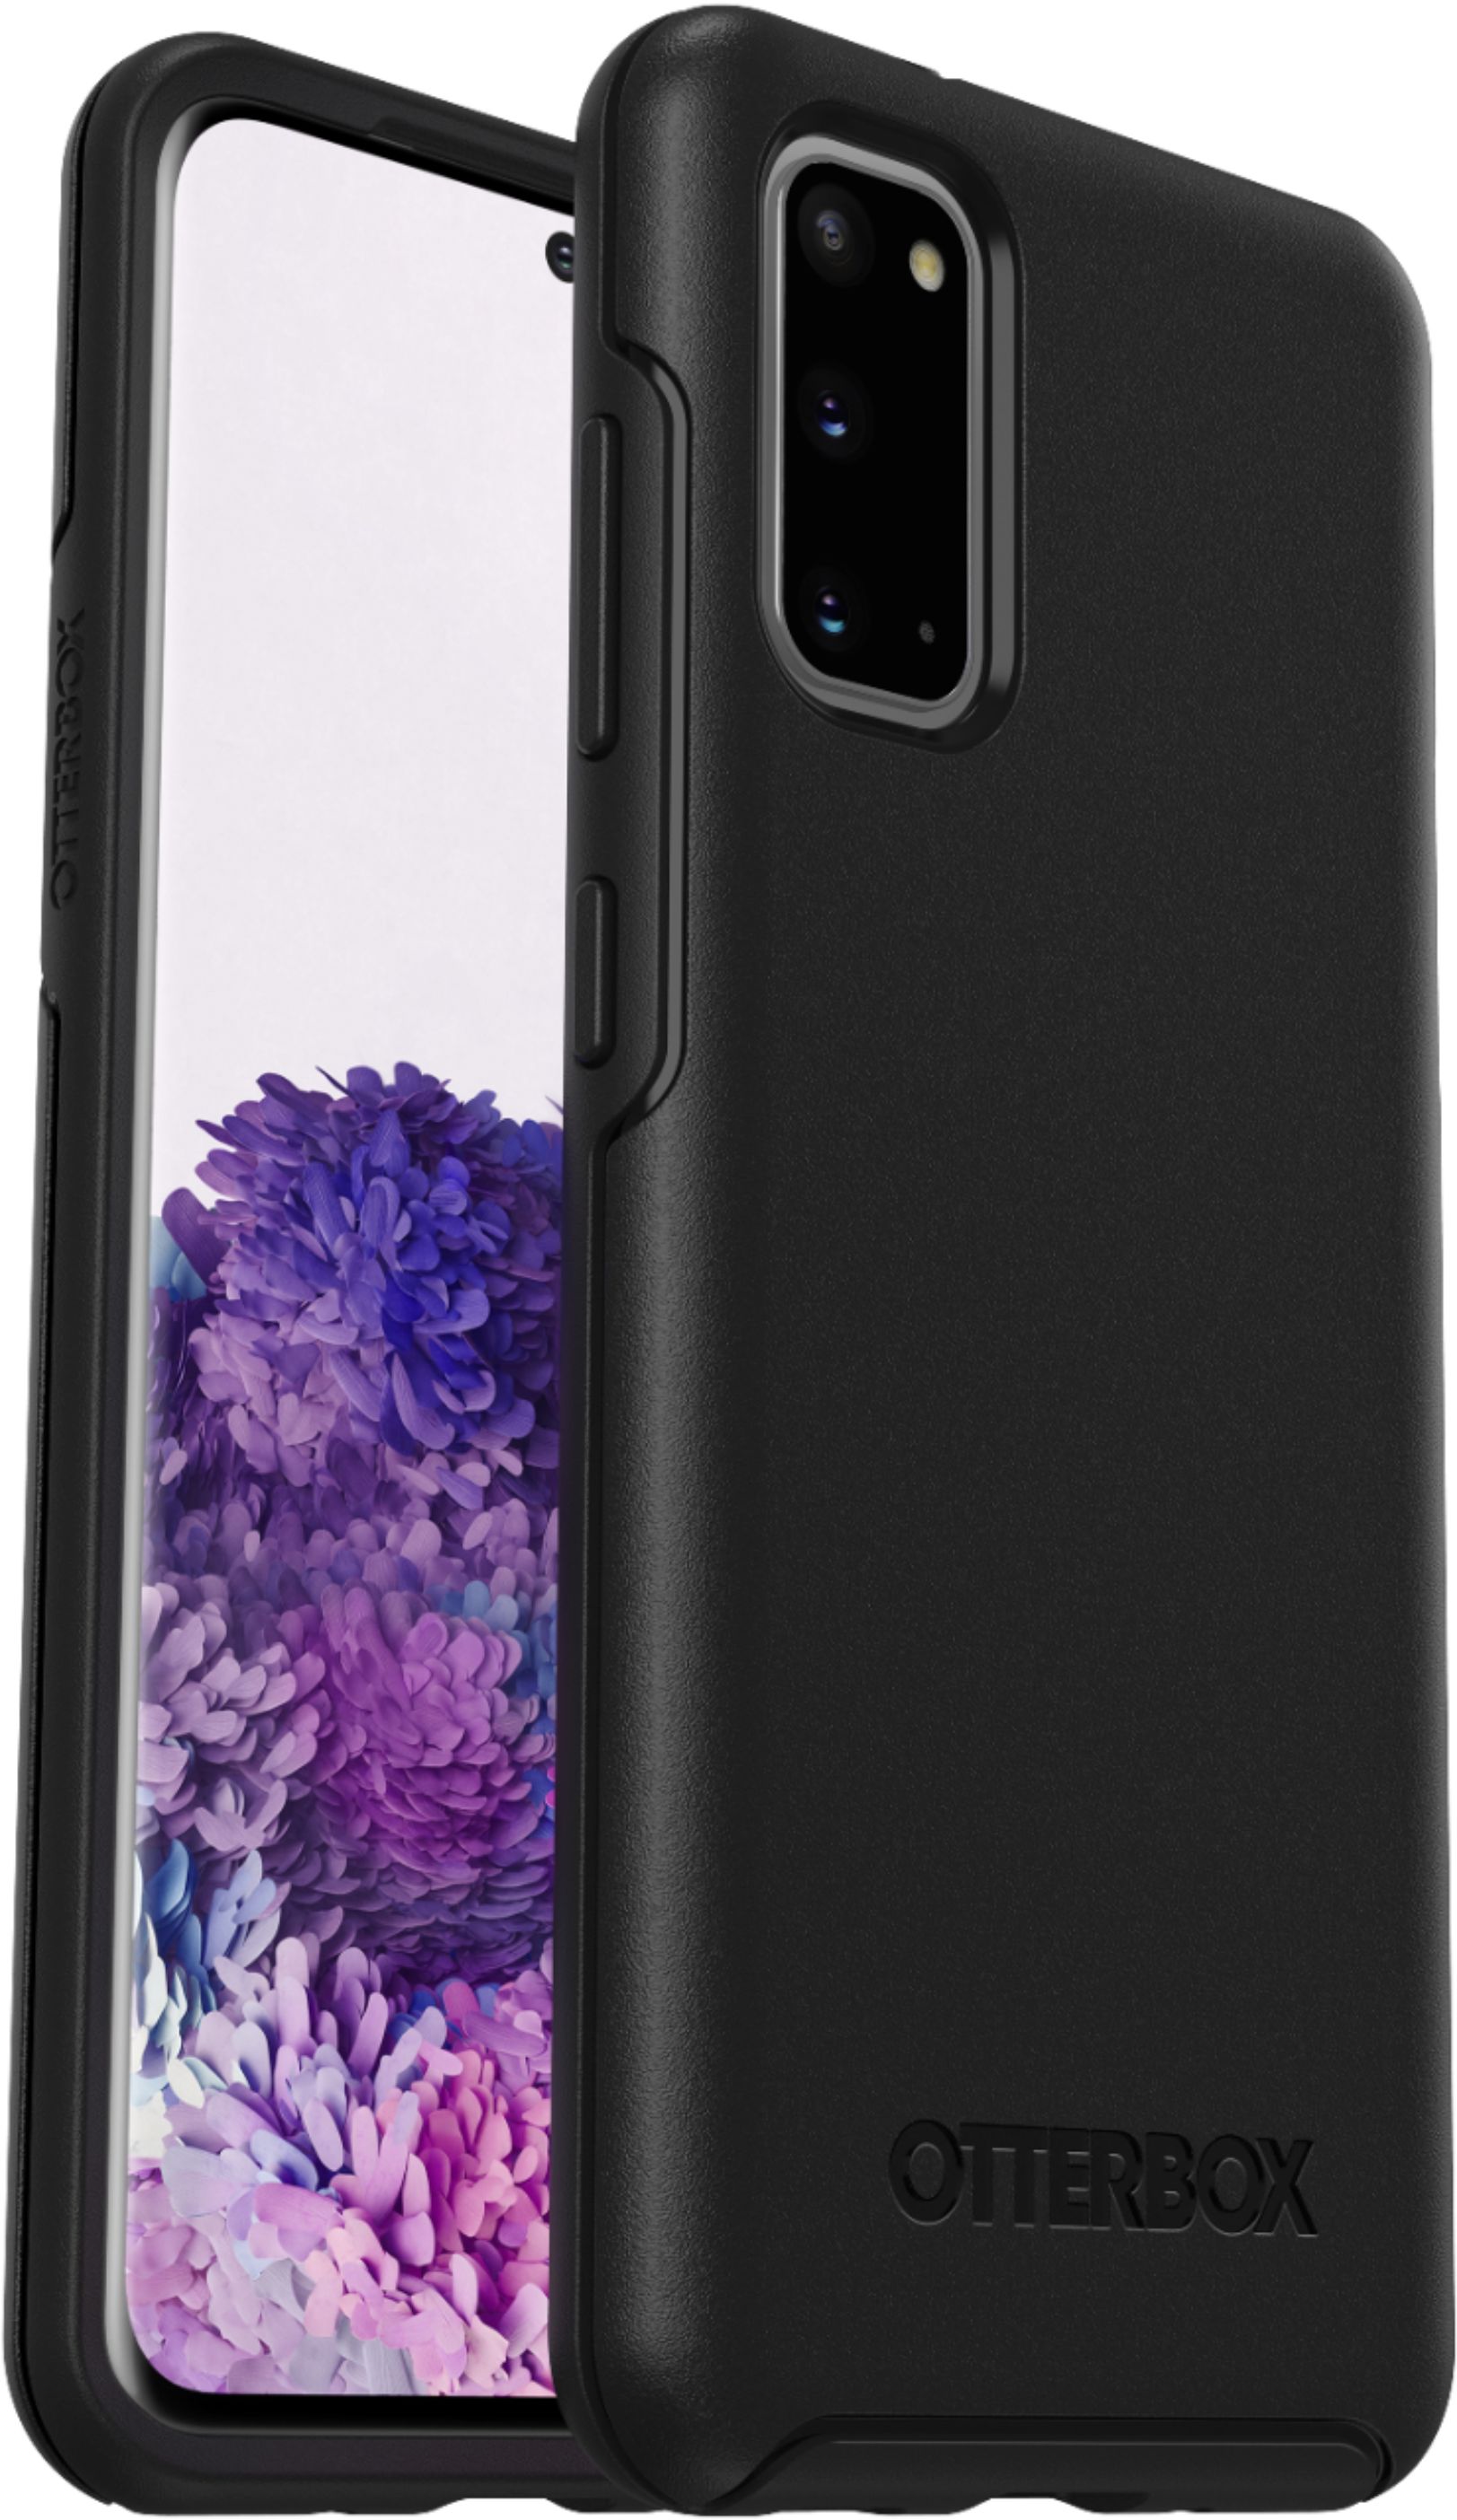 Angle View: OtterBox - Symmetry Series Case for Samsung Galaxy S20 5G - Black